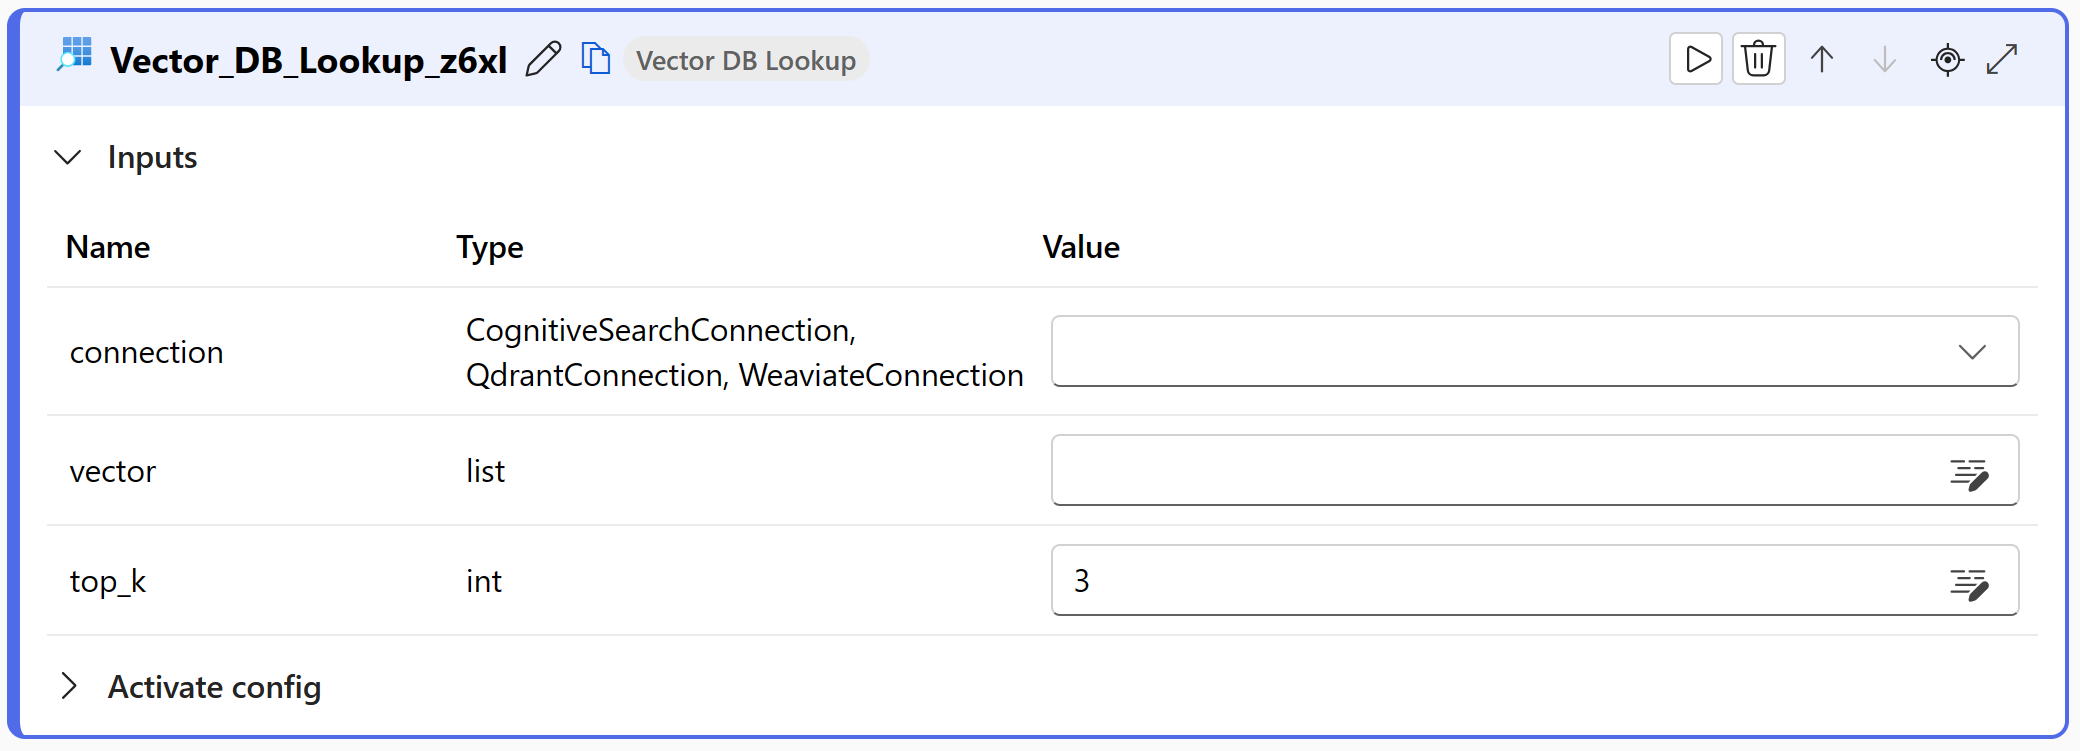 Screenshot of the Vector DB Lookup tool added to a flow in Azure AI Studio.